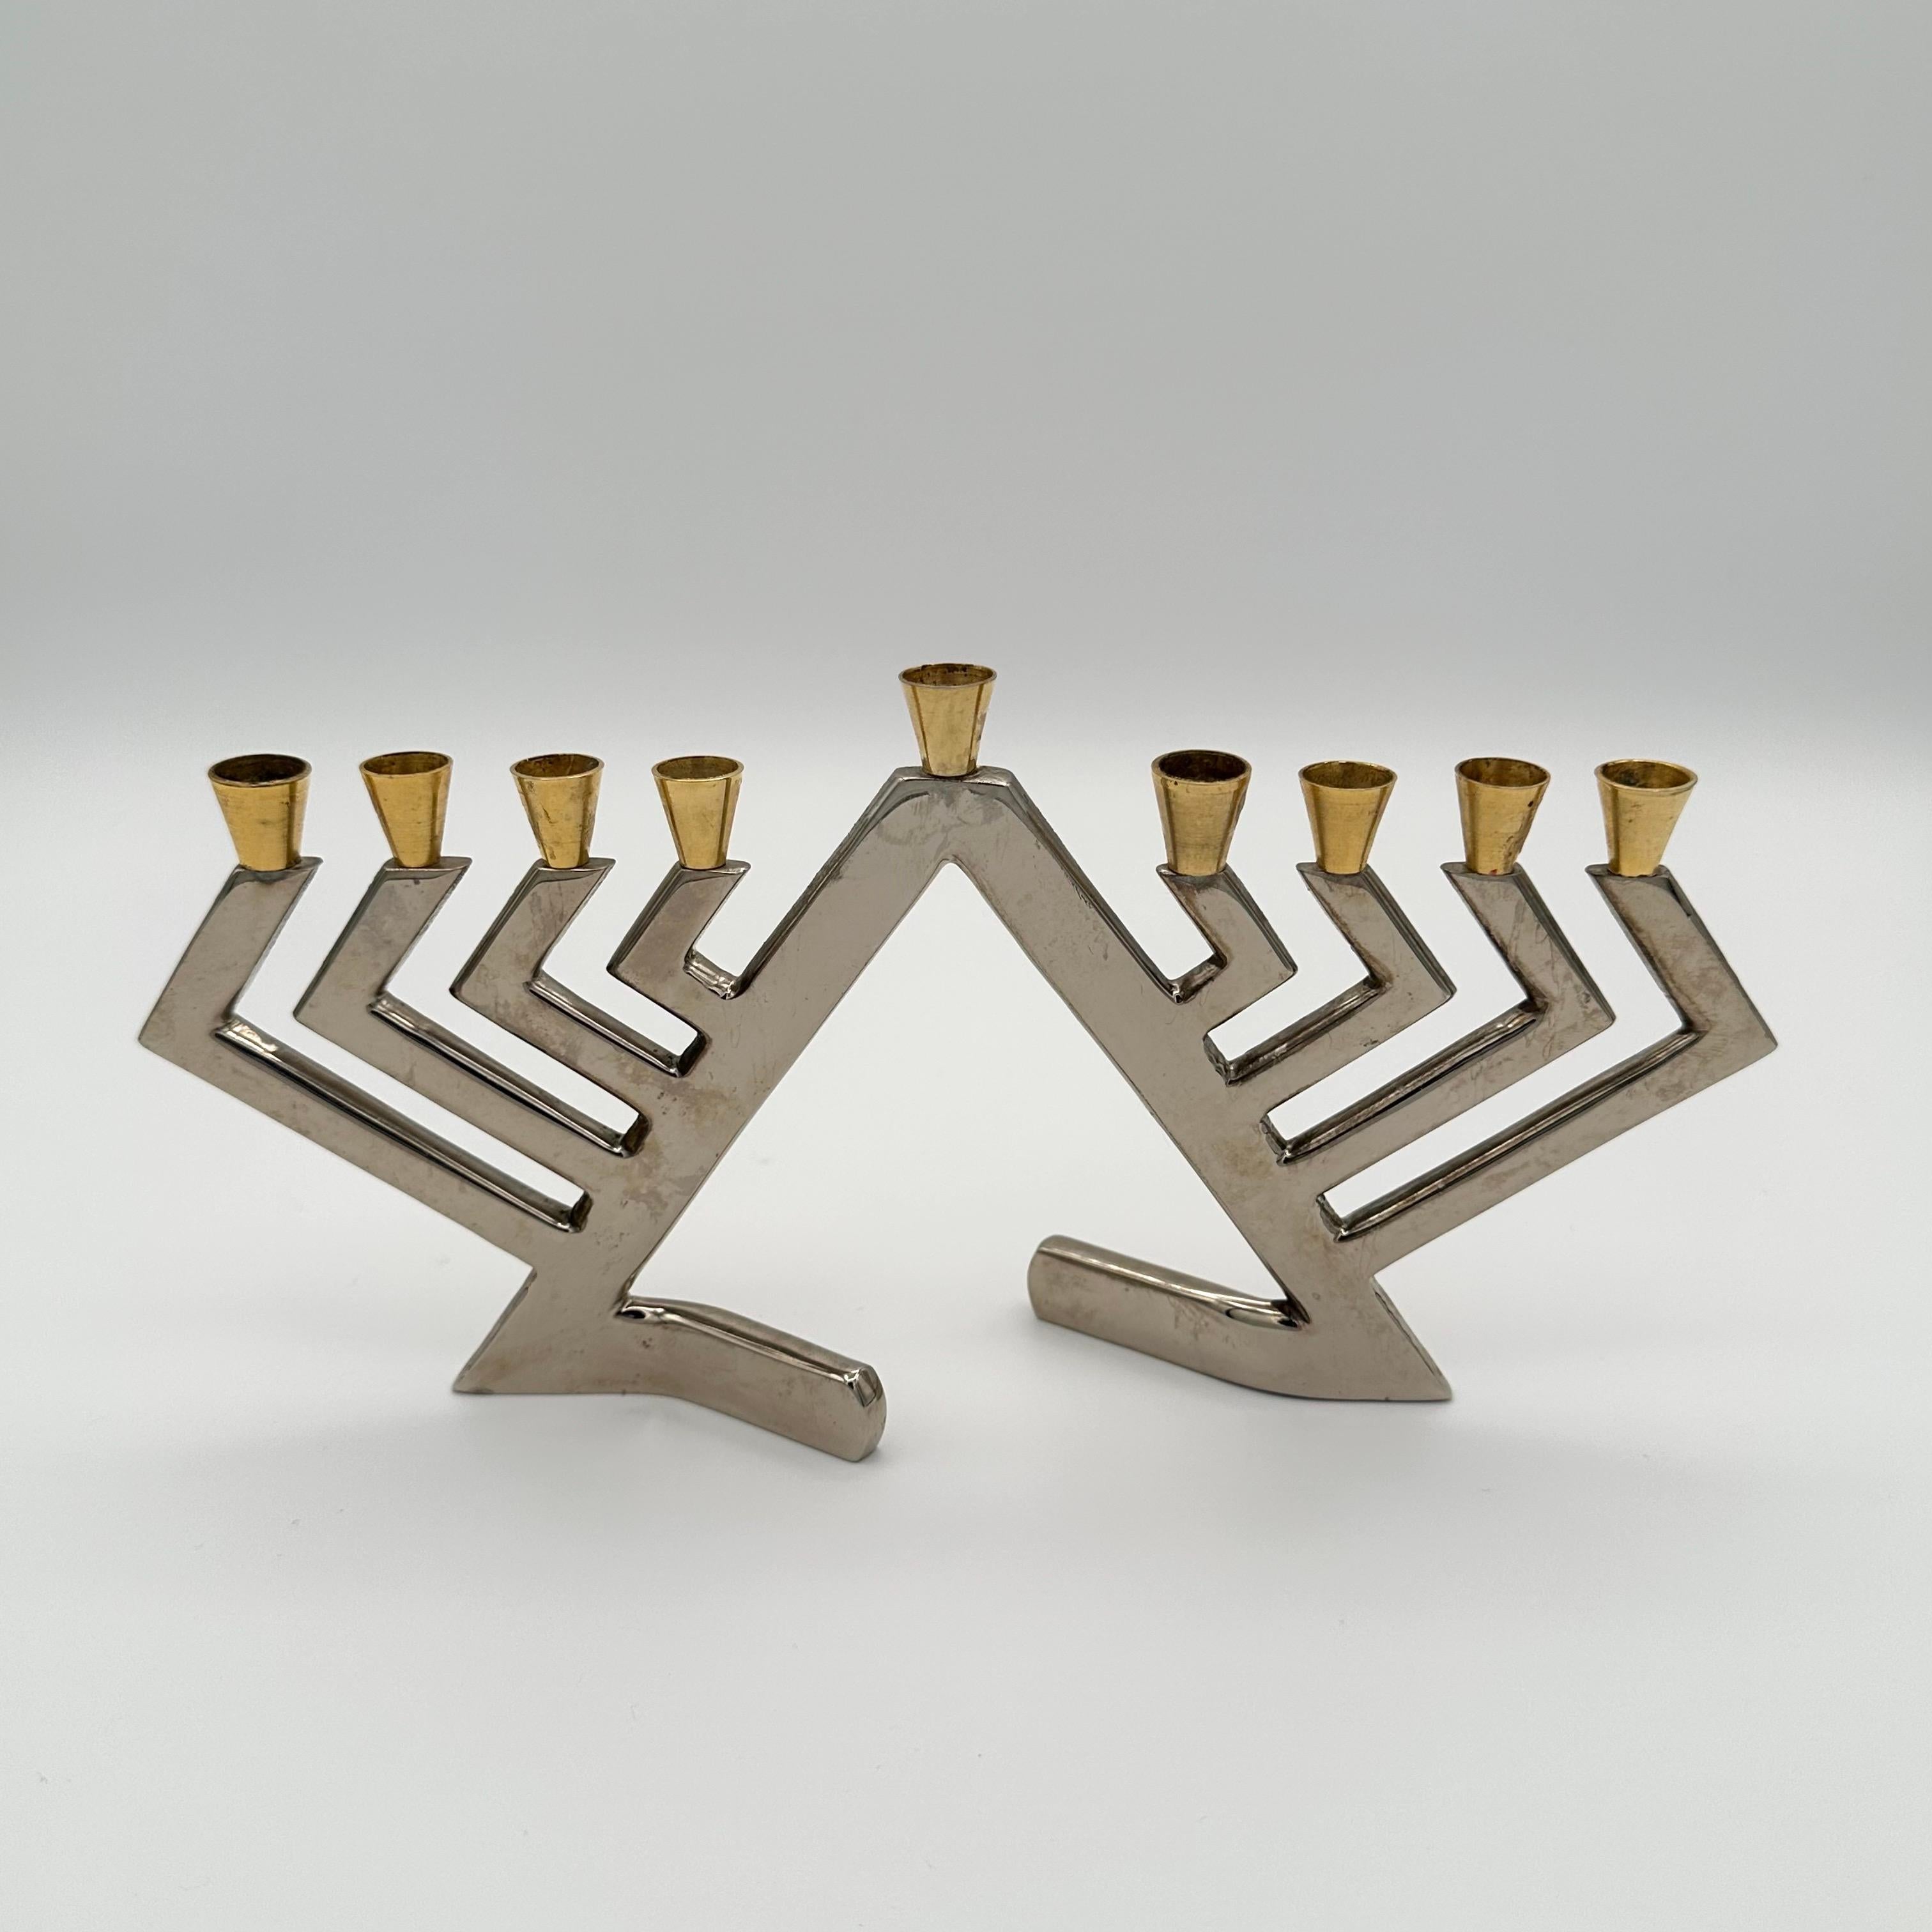 Vintage Chanukah Menorah in chromed steel and brass with a geometric form that evokes Brutalist, Postmodern, and even Art Deco skyscraper styles. Angular and zig-zagging chromed steel arms support flared brass candleholders. Signed on one of the